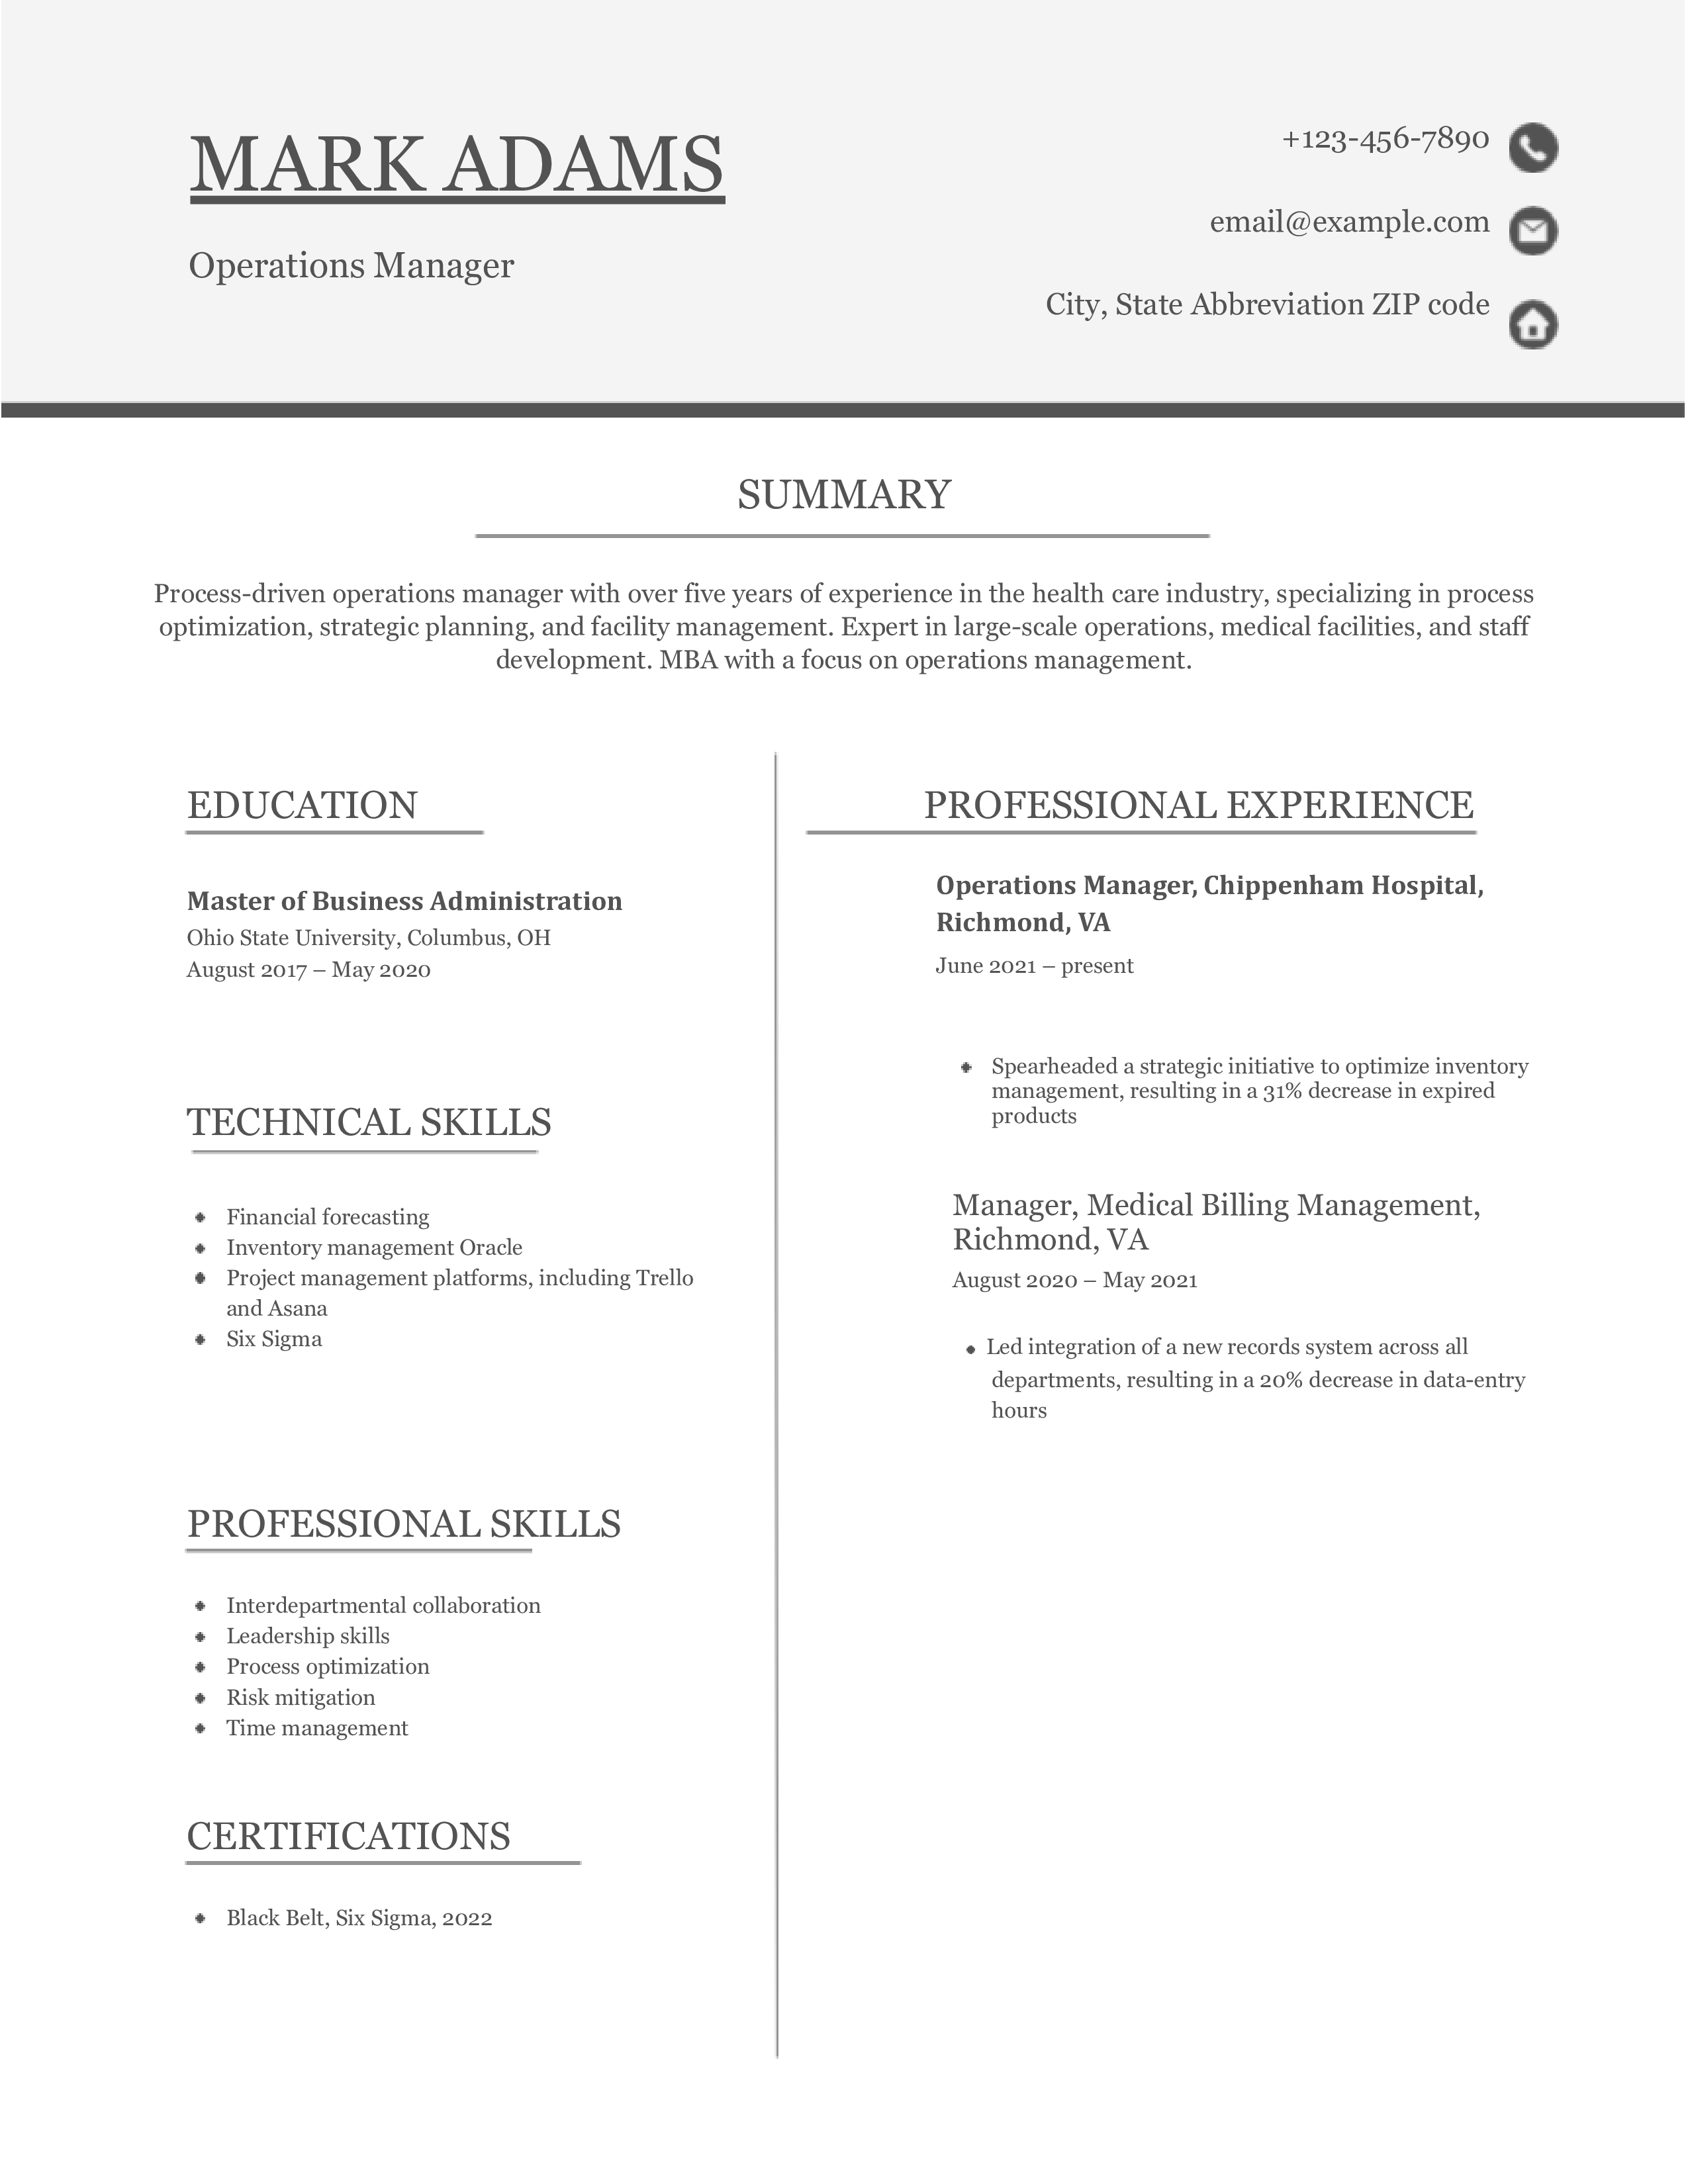 Hybrid Resume Templates and Examples for [y]